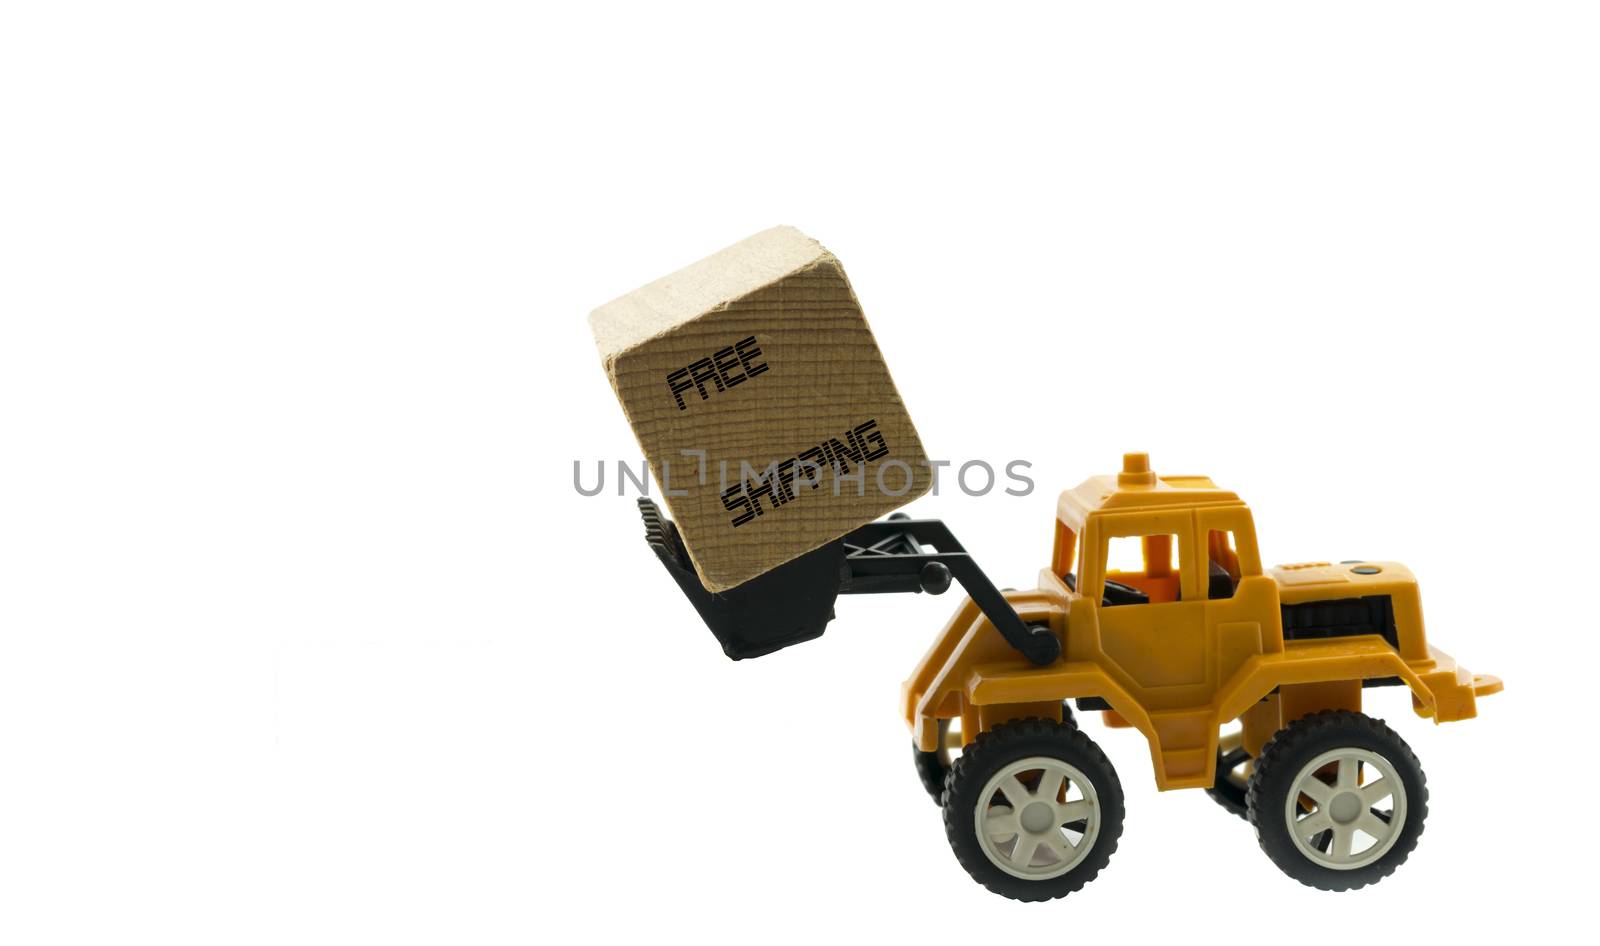 yellow excavator with free shipping text